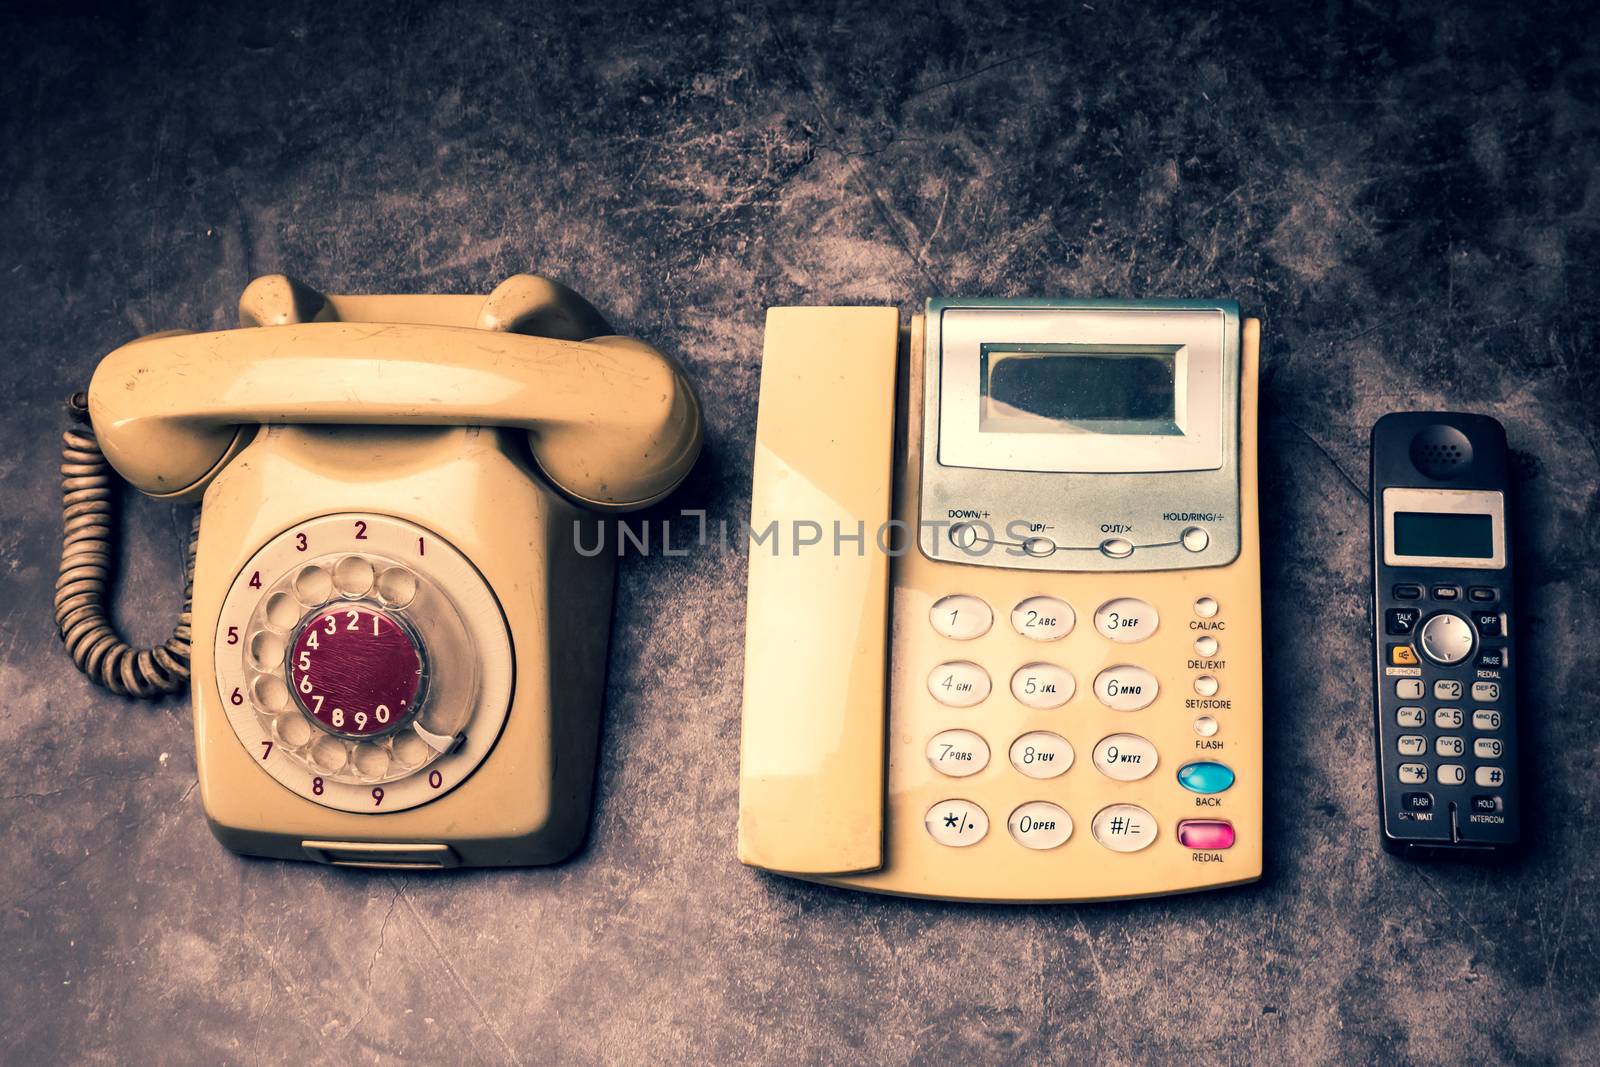 An old telephone with rotary dial, a landline and obsoleted cellphone on a grunge background.